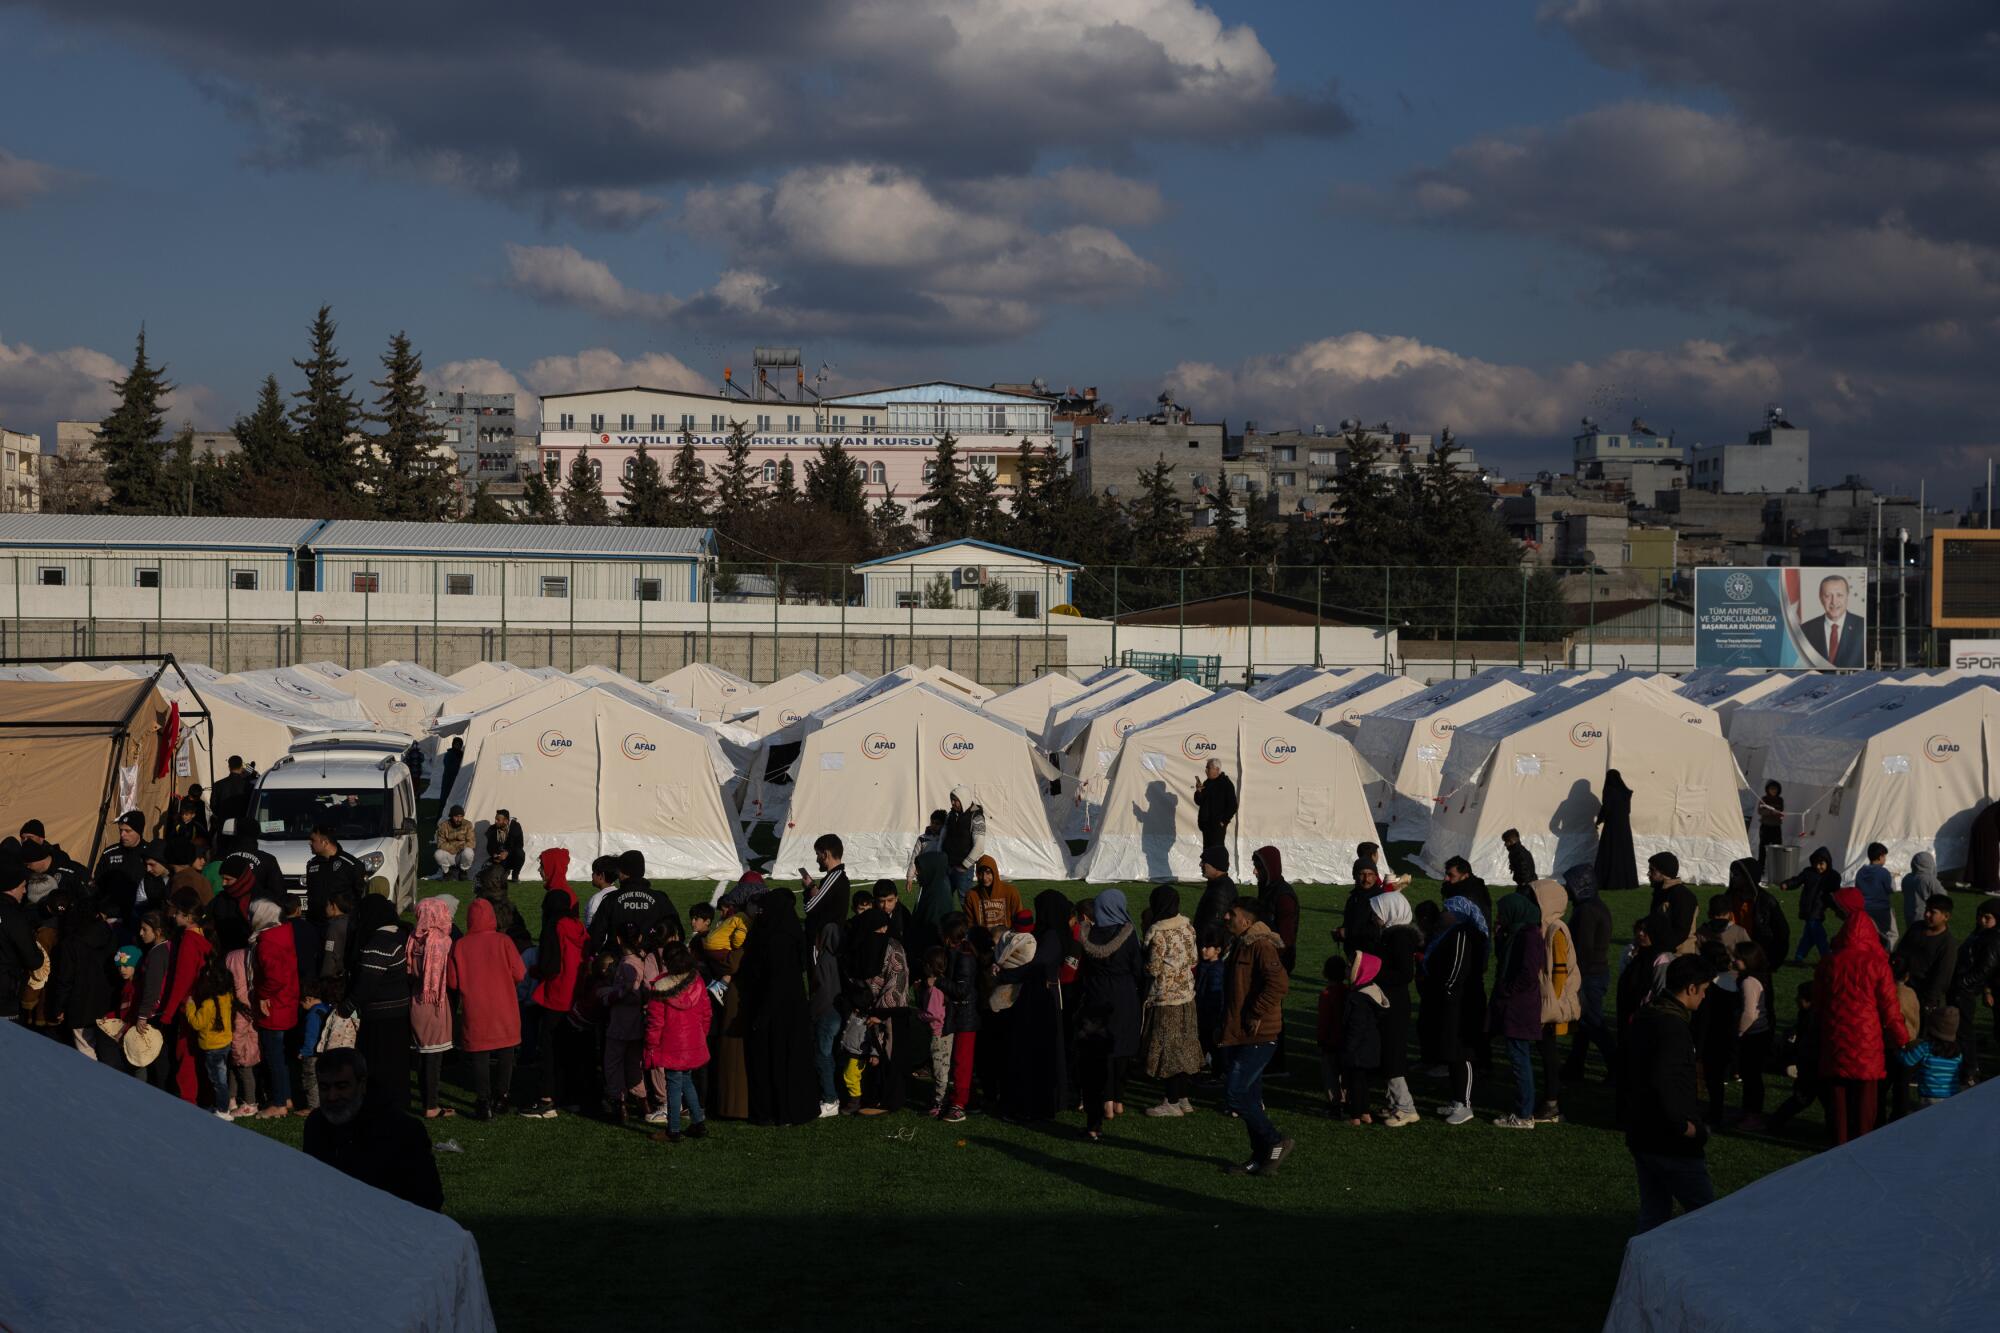 Displaced Syrians stand in line near a row of white tents.